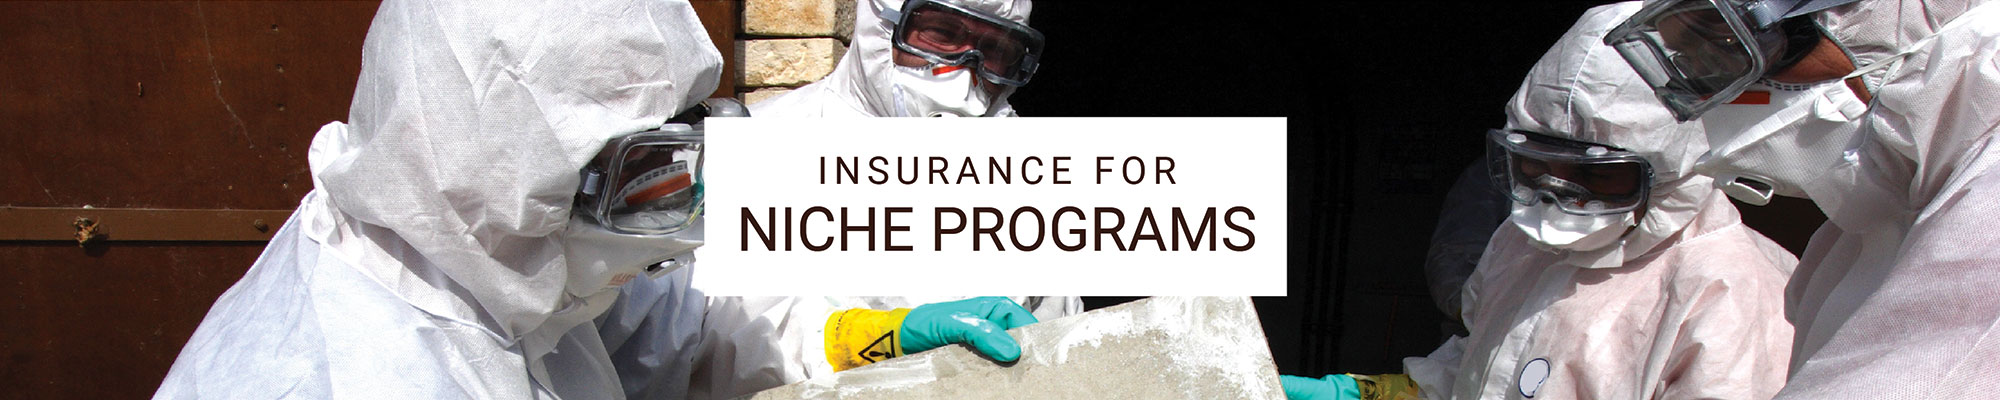 photo of people in HazMat suits with text 'Insurance for Niche Programs'